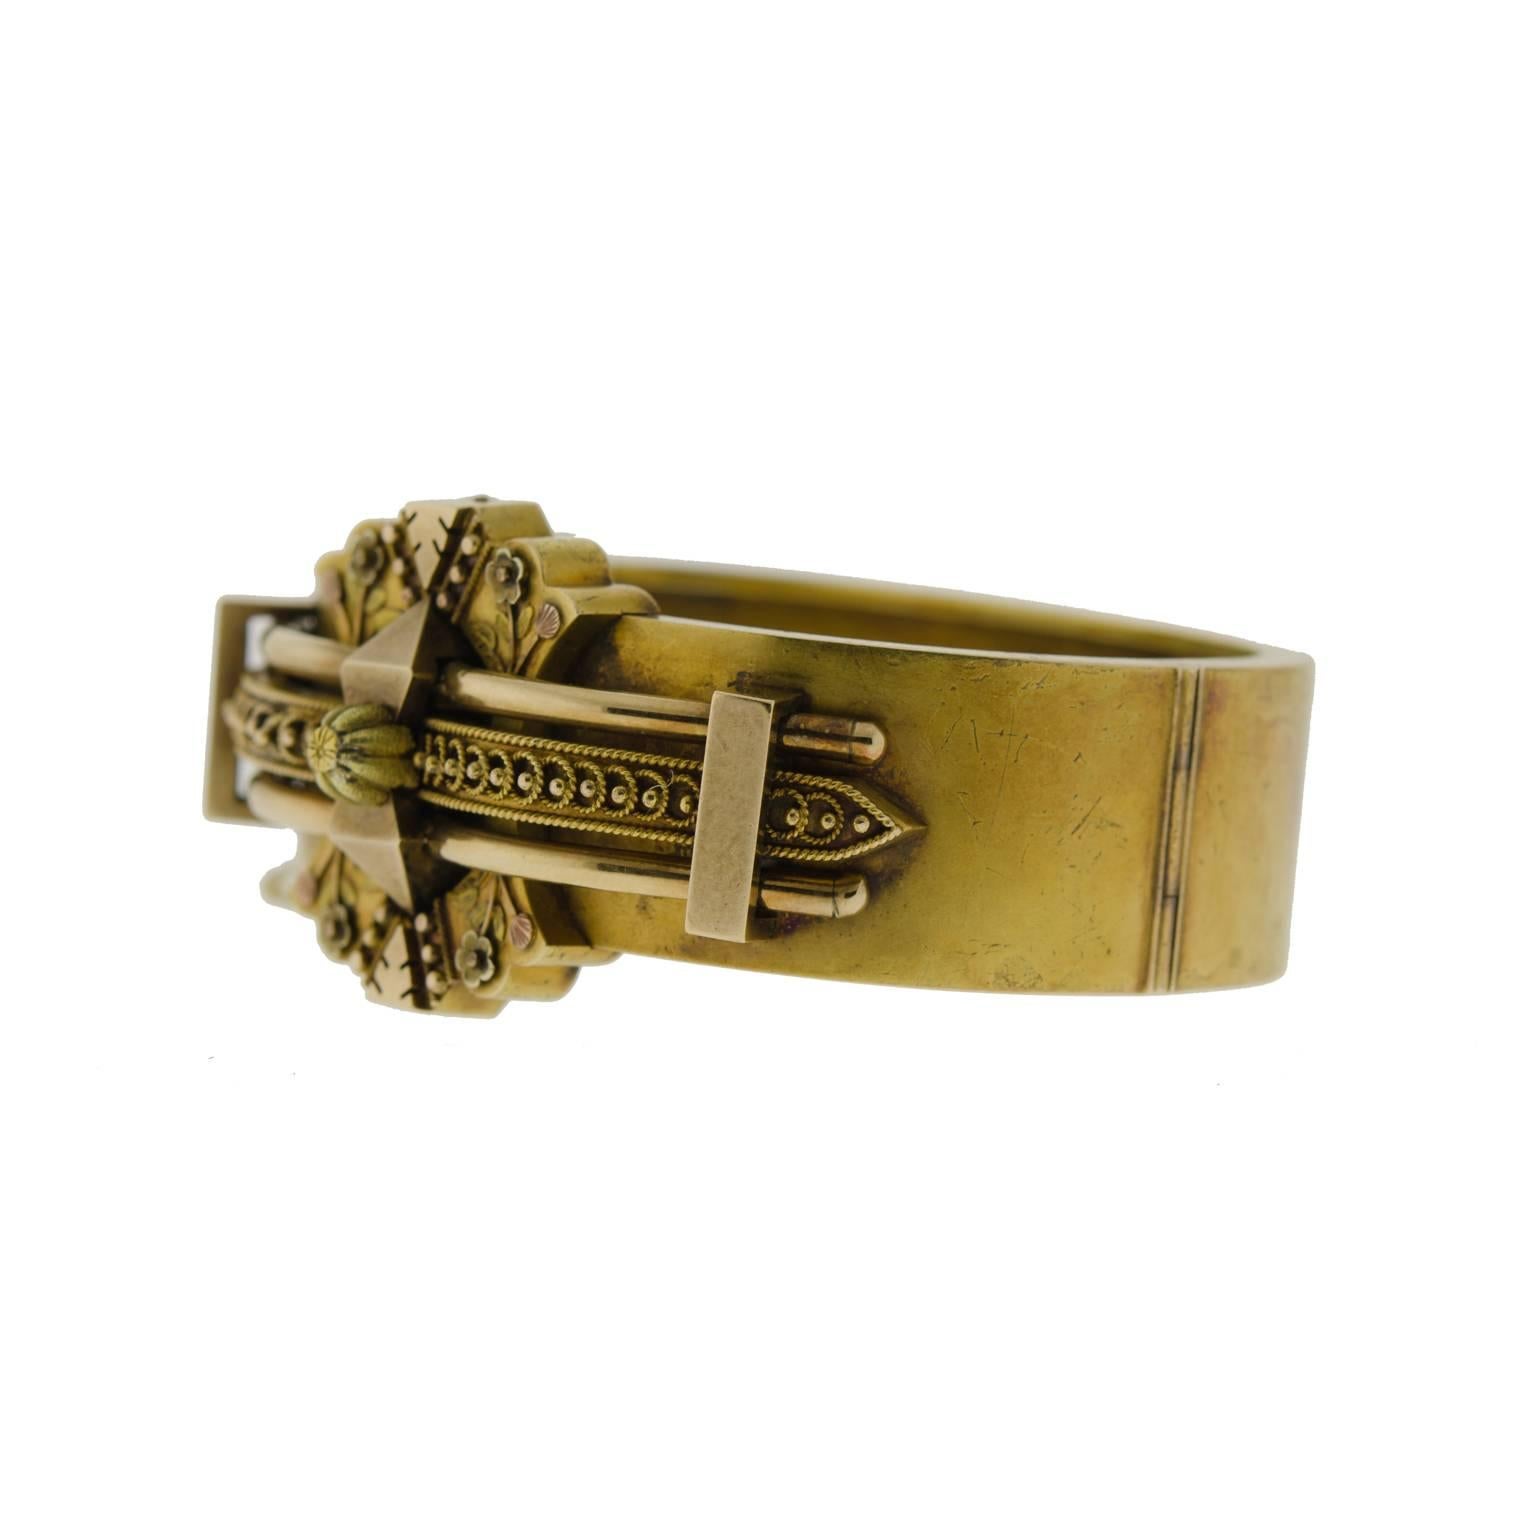 Dramatic can be used to describe this fabulous multidimensional Victorian wide hinged bangle bracelet. Derived from the late nineteenth century and handcrafted in 14 kt yellow gold this stunning bracelet is embellished with a classic Etruscan